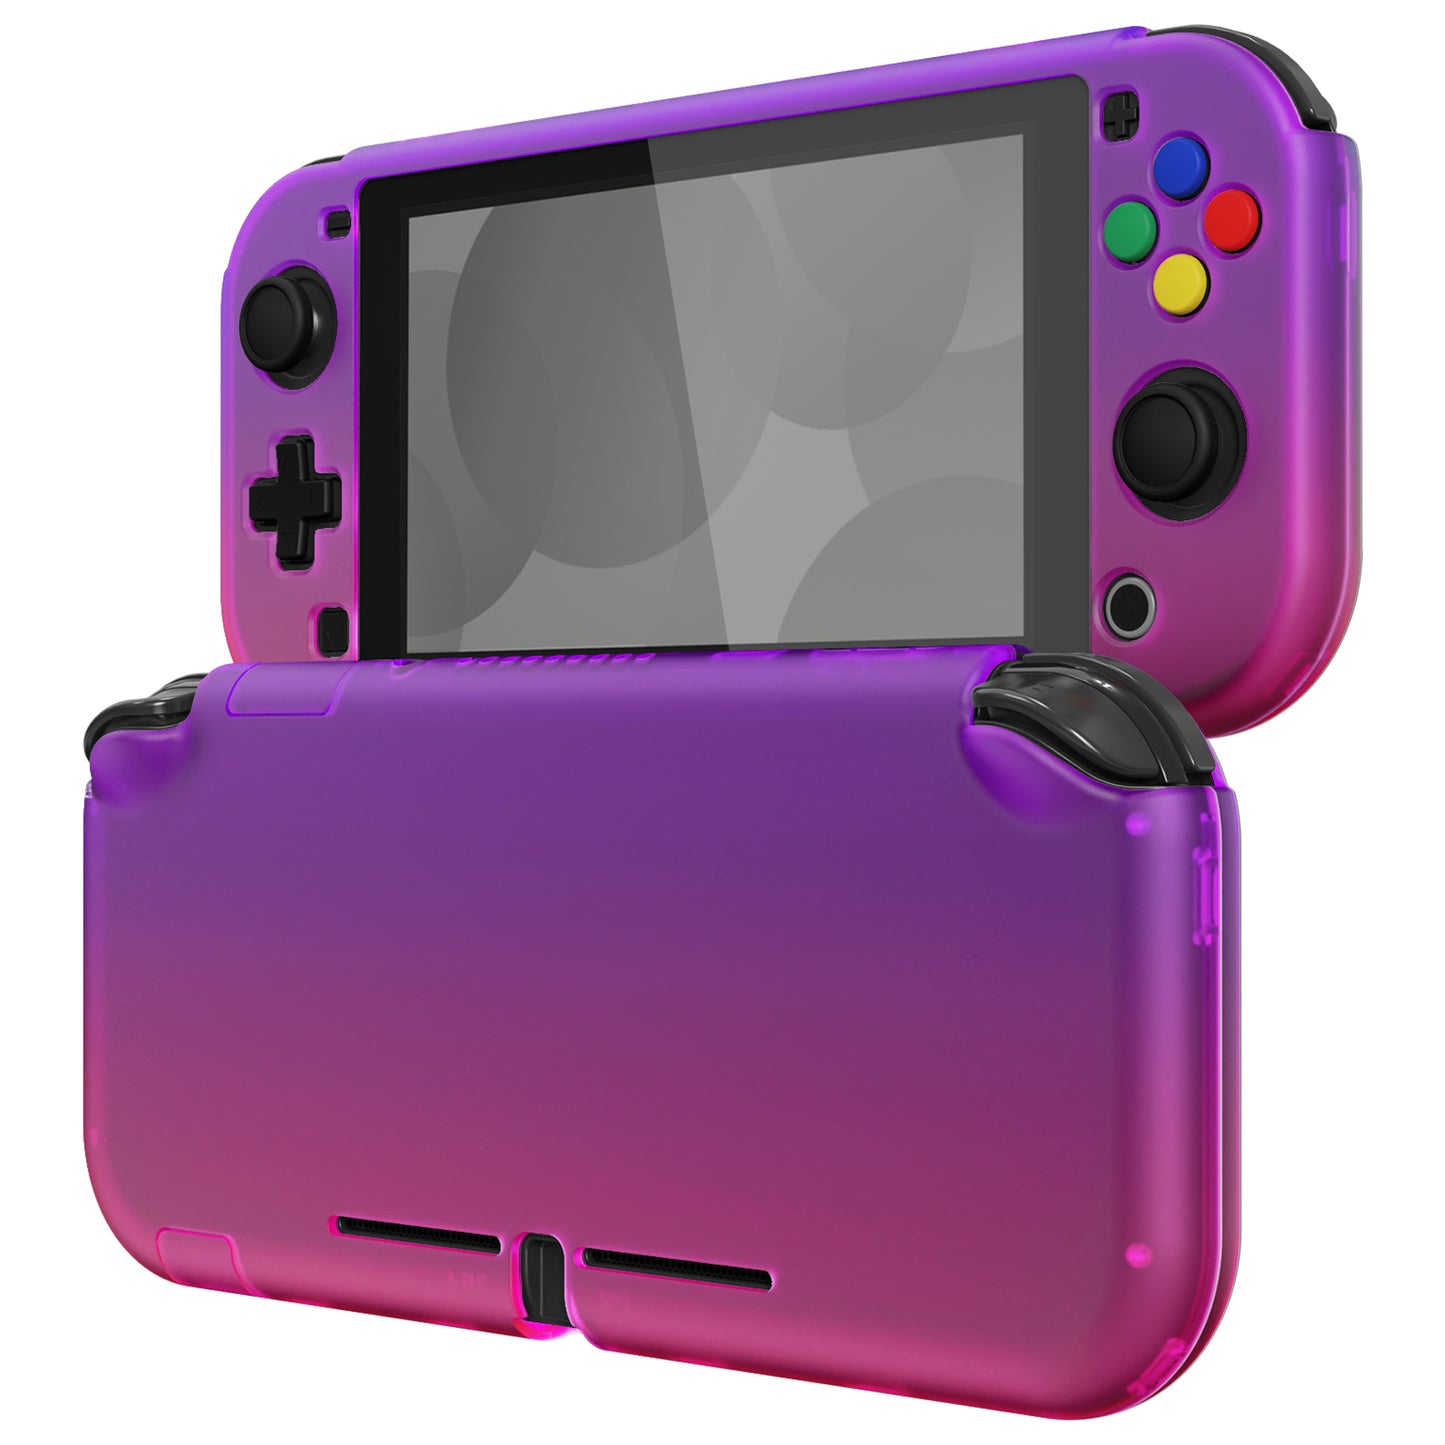 PlayVital Clear Atomic Purple Rose Red Protective Case for NS Switch Lite, Hard Cover Protector for NS Switch Lite - 1 x Black Border Tempered Glass Screen Protector Included - YYNLP007 PlayVital